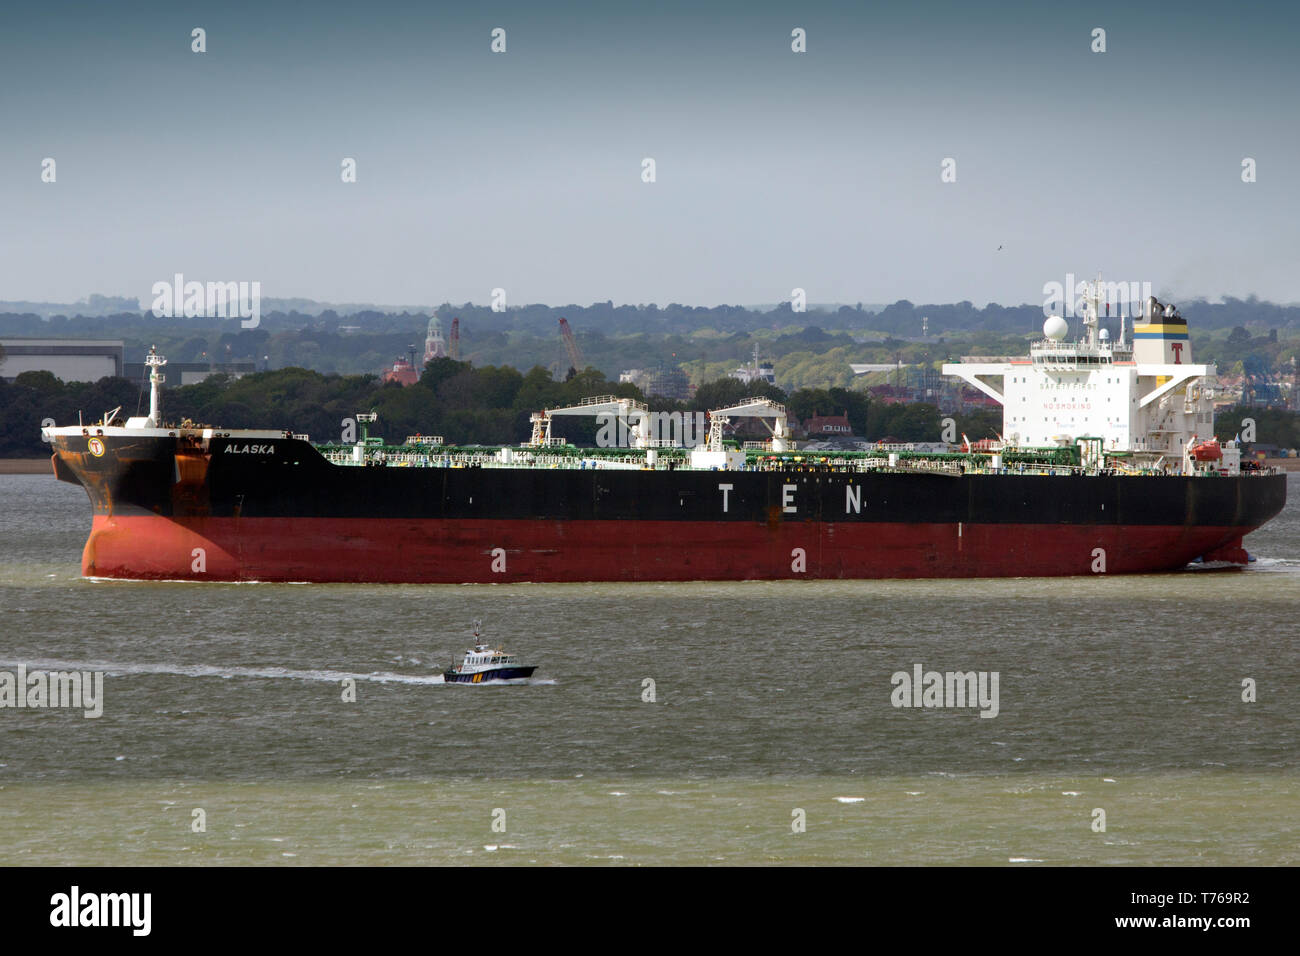 Chemical,Southampton,services,port,towing,Tanker,Oil,Refinery,Fawley,The Solent,fossil,global,change,warming,tow,assistance,Tug,fuel,petrol,state,flag Stock Photo